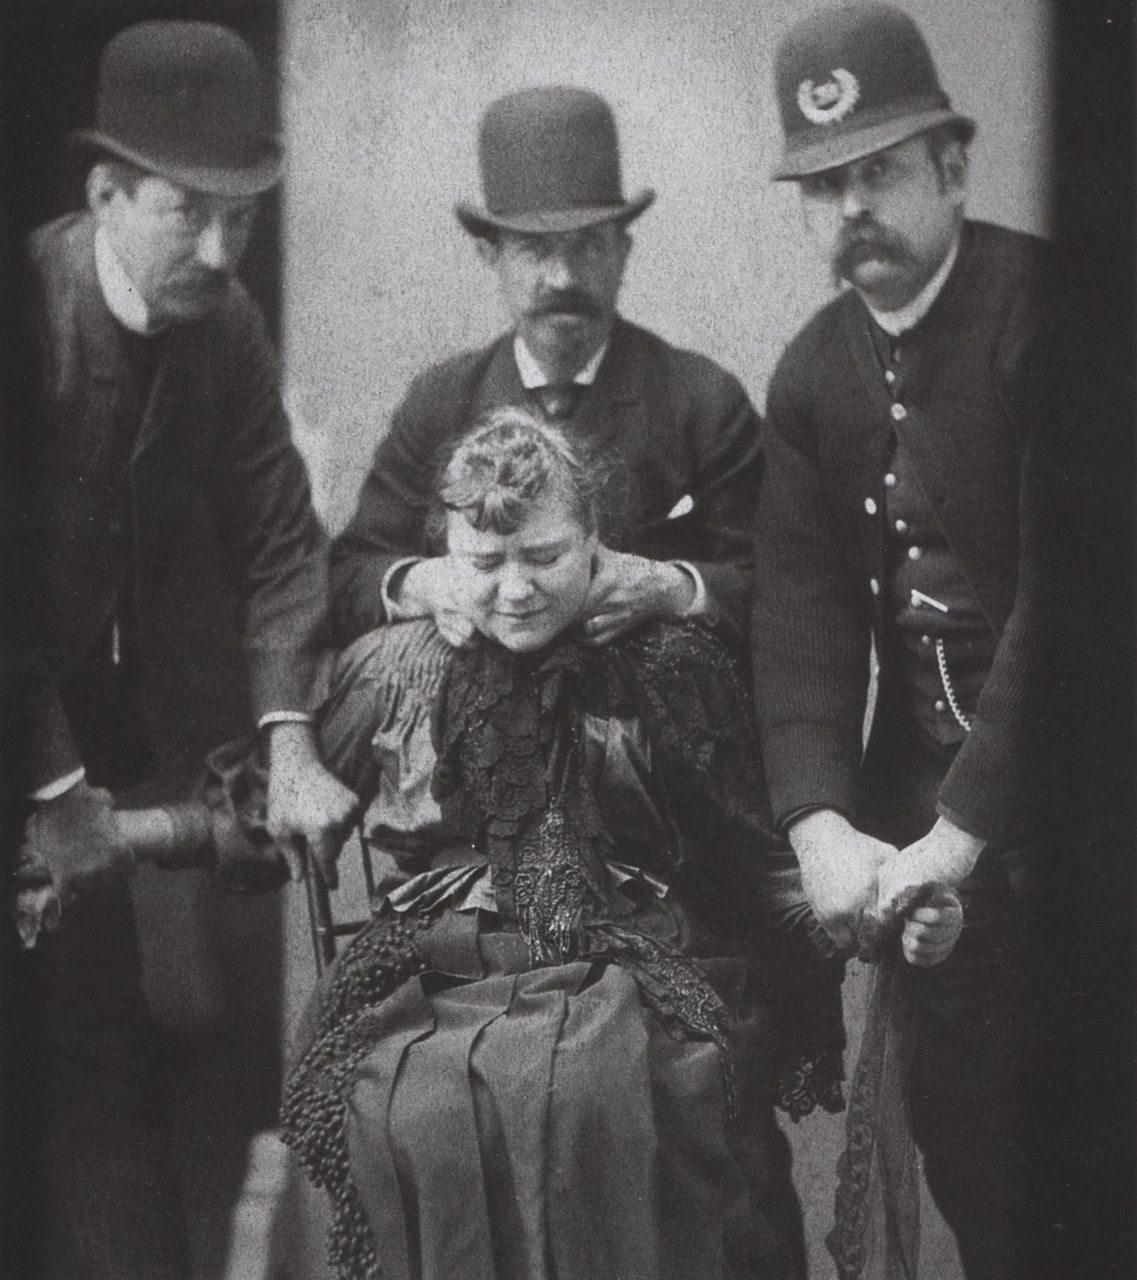 Police officers physically force a woman to get her mugshot taken in NYC, US in 1890.